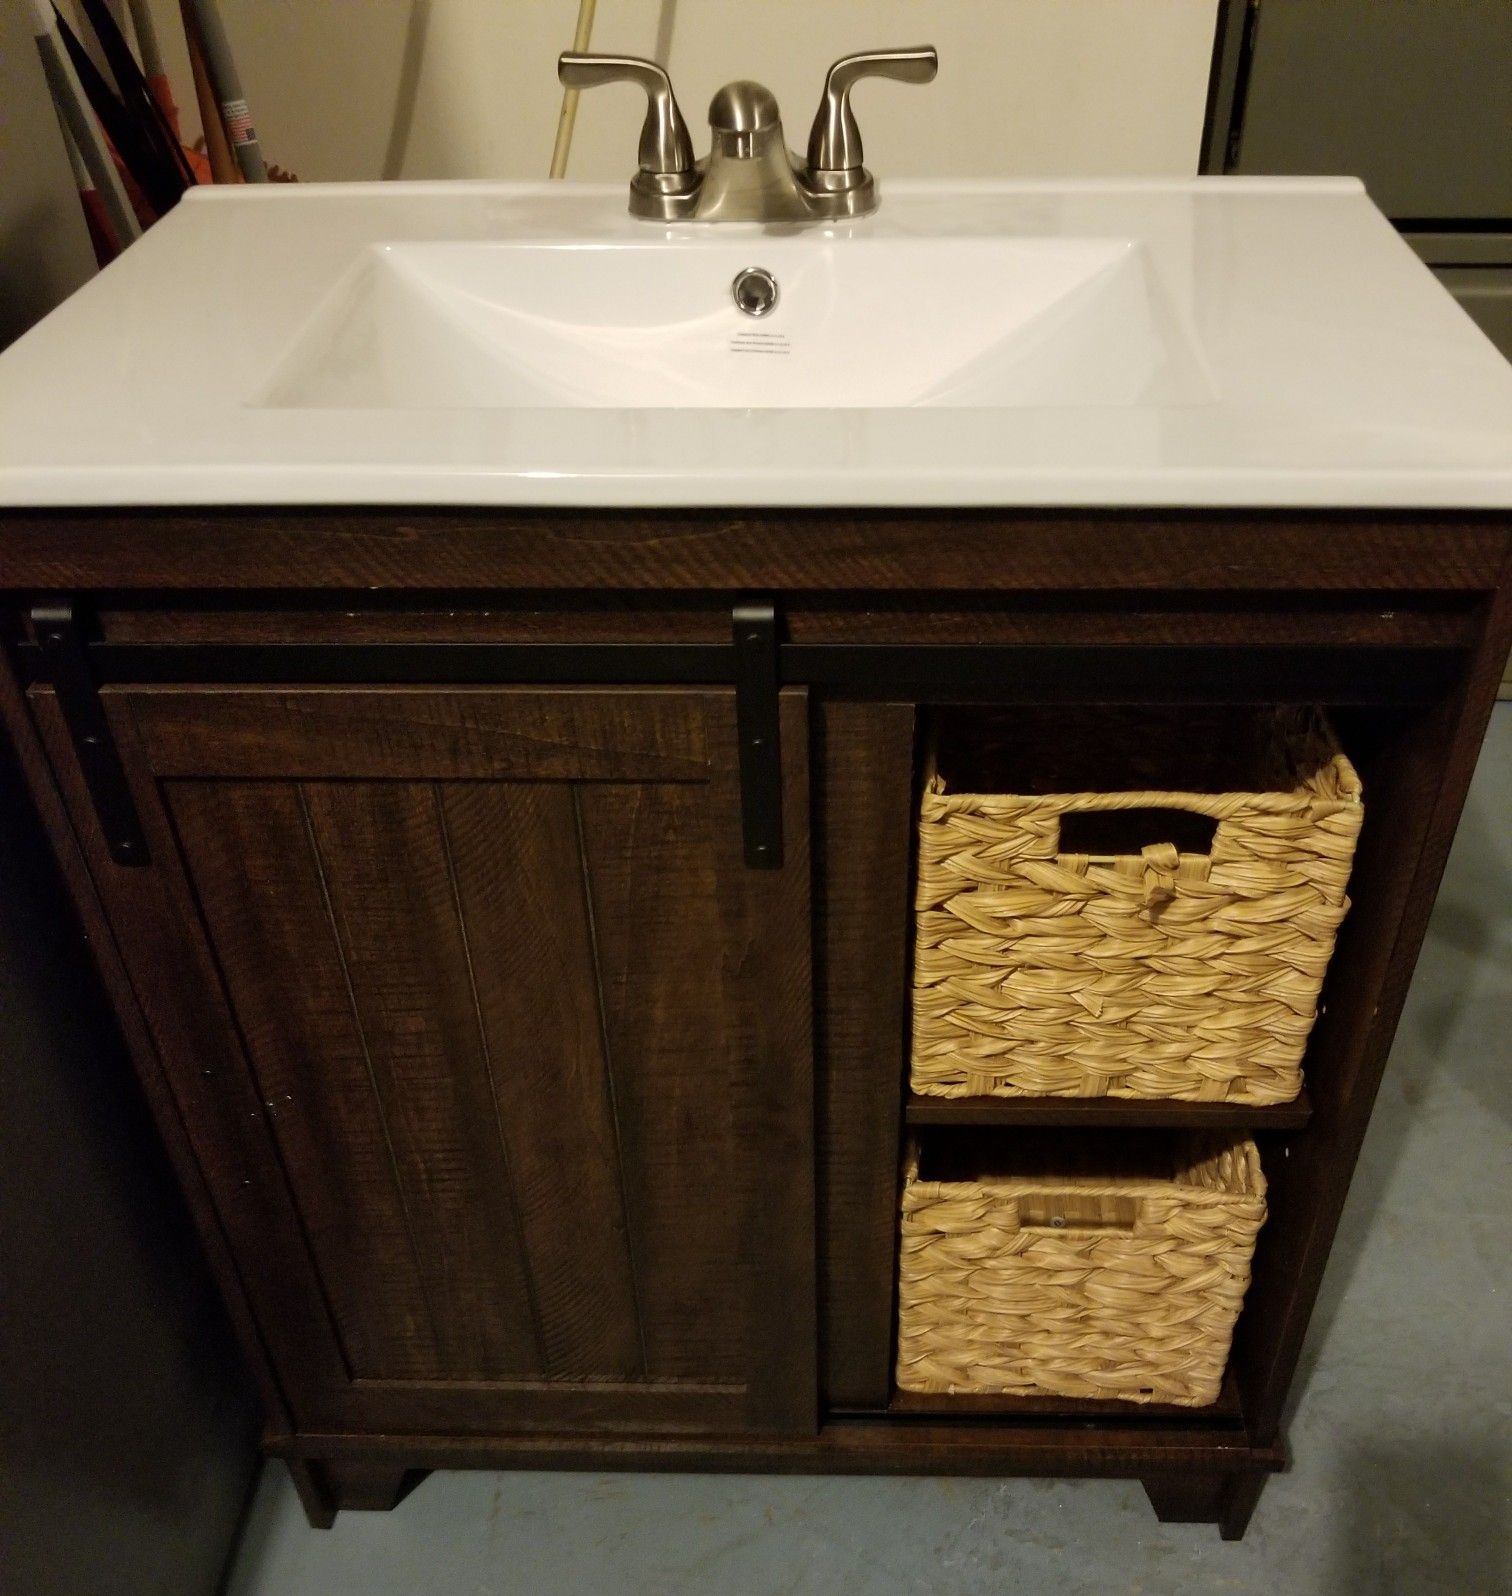 VANITY BATHROOM........30 INCHES WIDE...........BRAND NEW